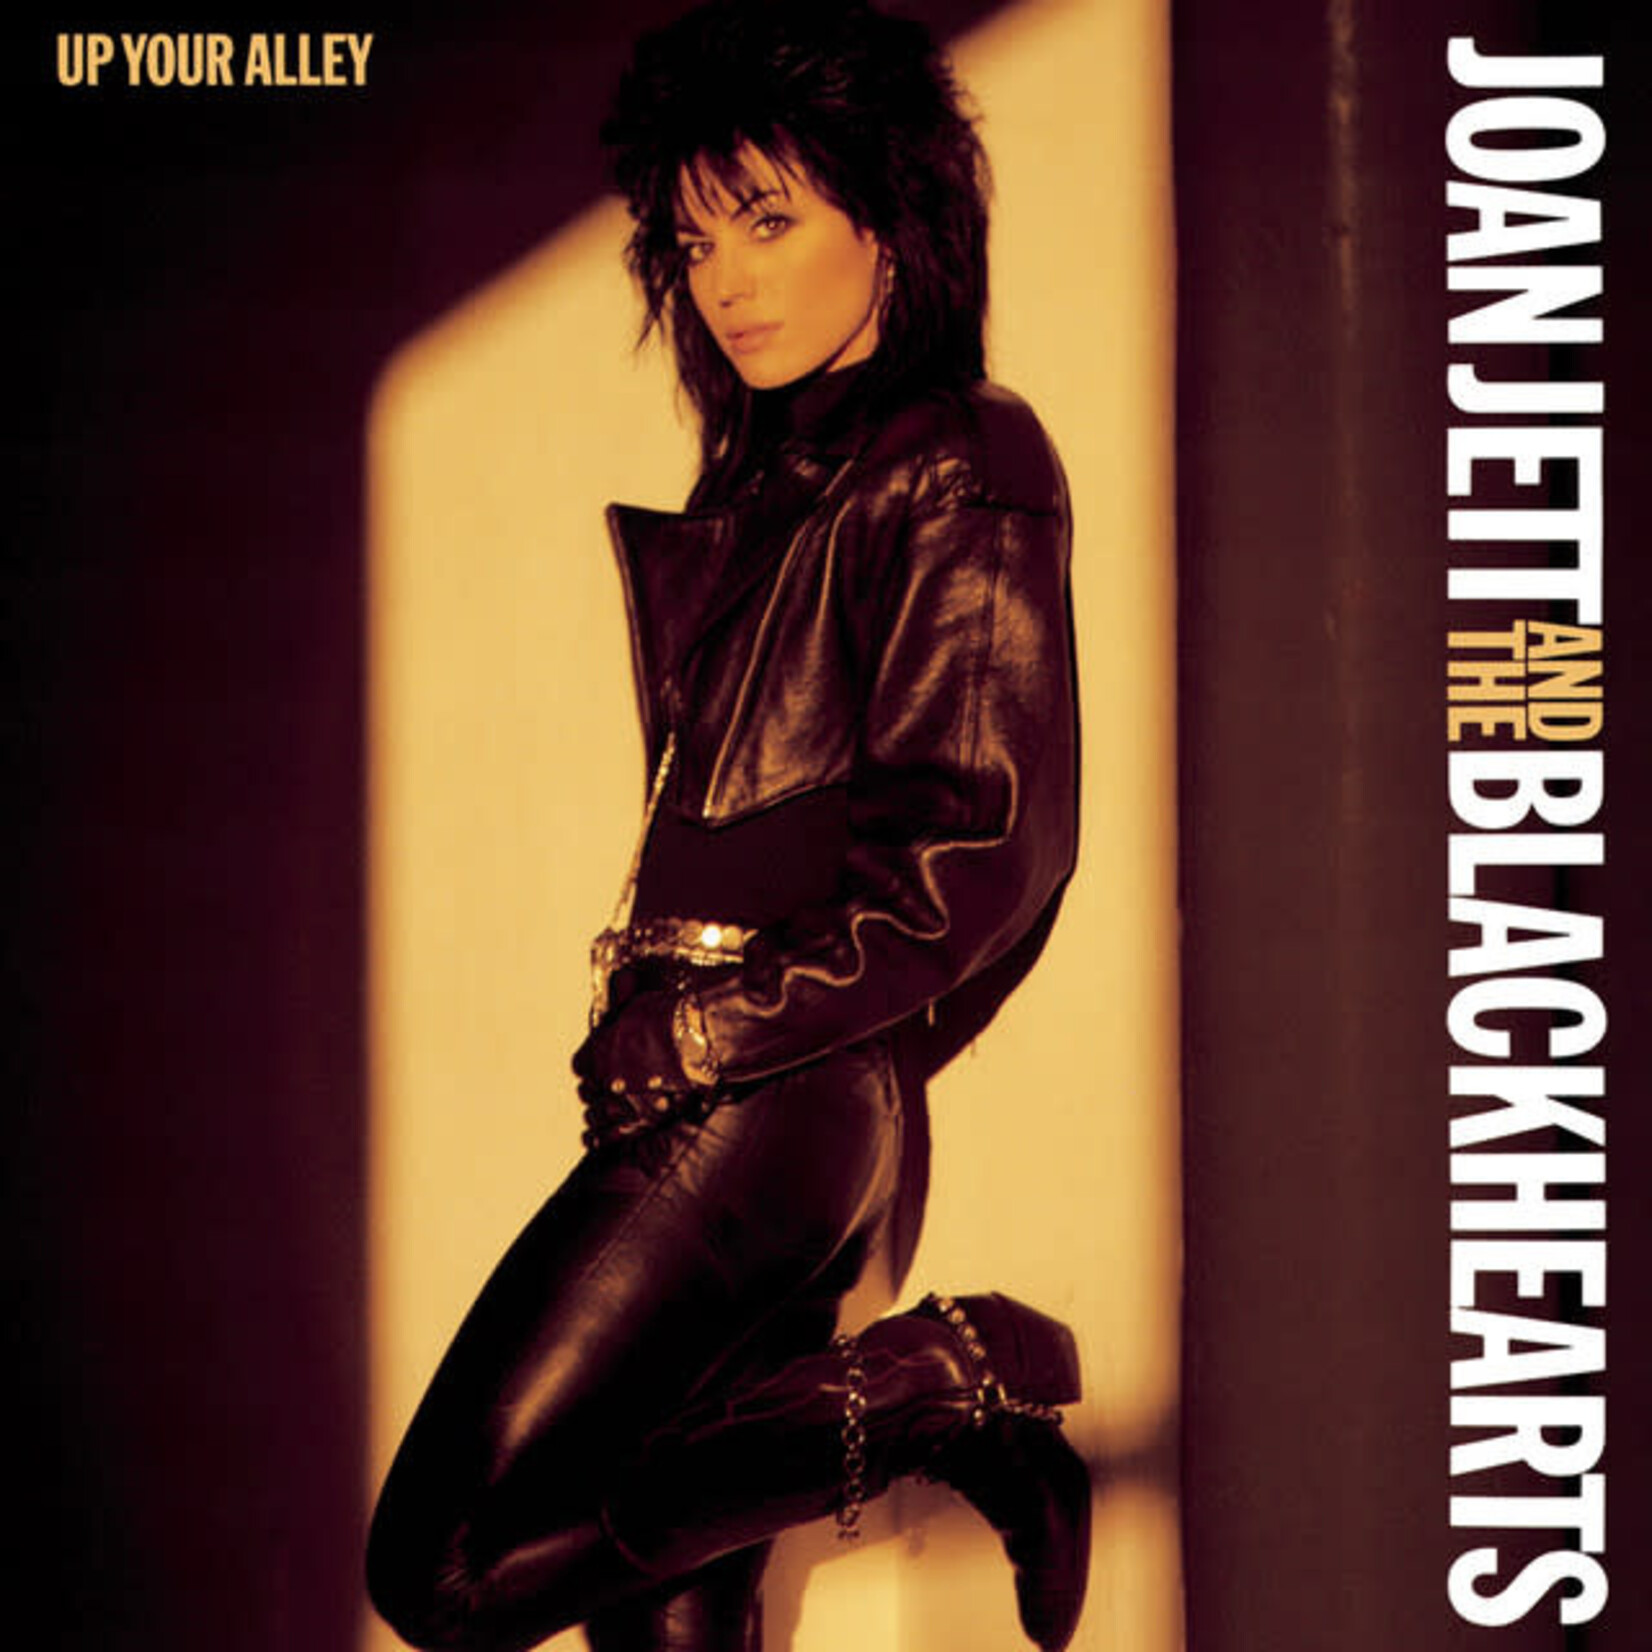 Joan Jett - Up Your Alley [CD]